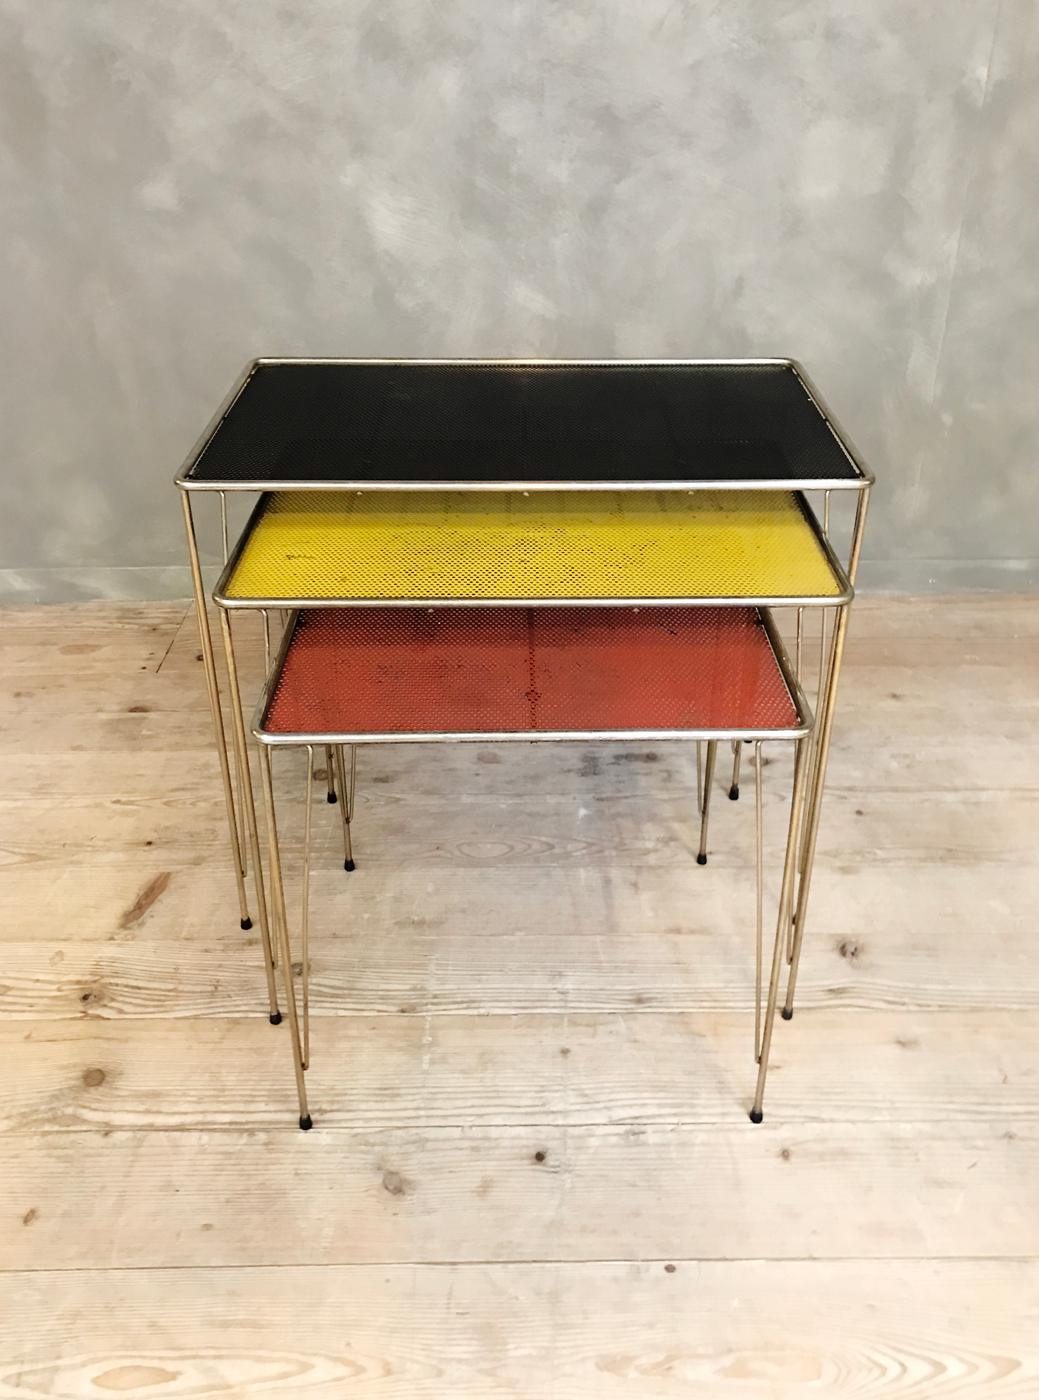 This set of three nesting tables features perforated metal tops in black, yellow, and red, set on hairpin legs. They were probably made in France reminding of Mathieu Matego.